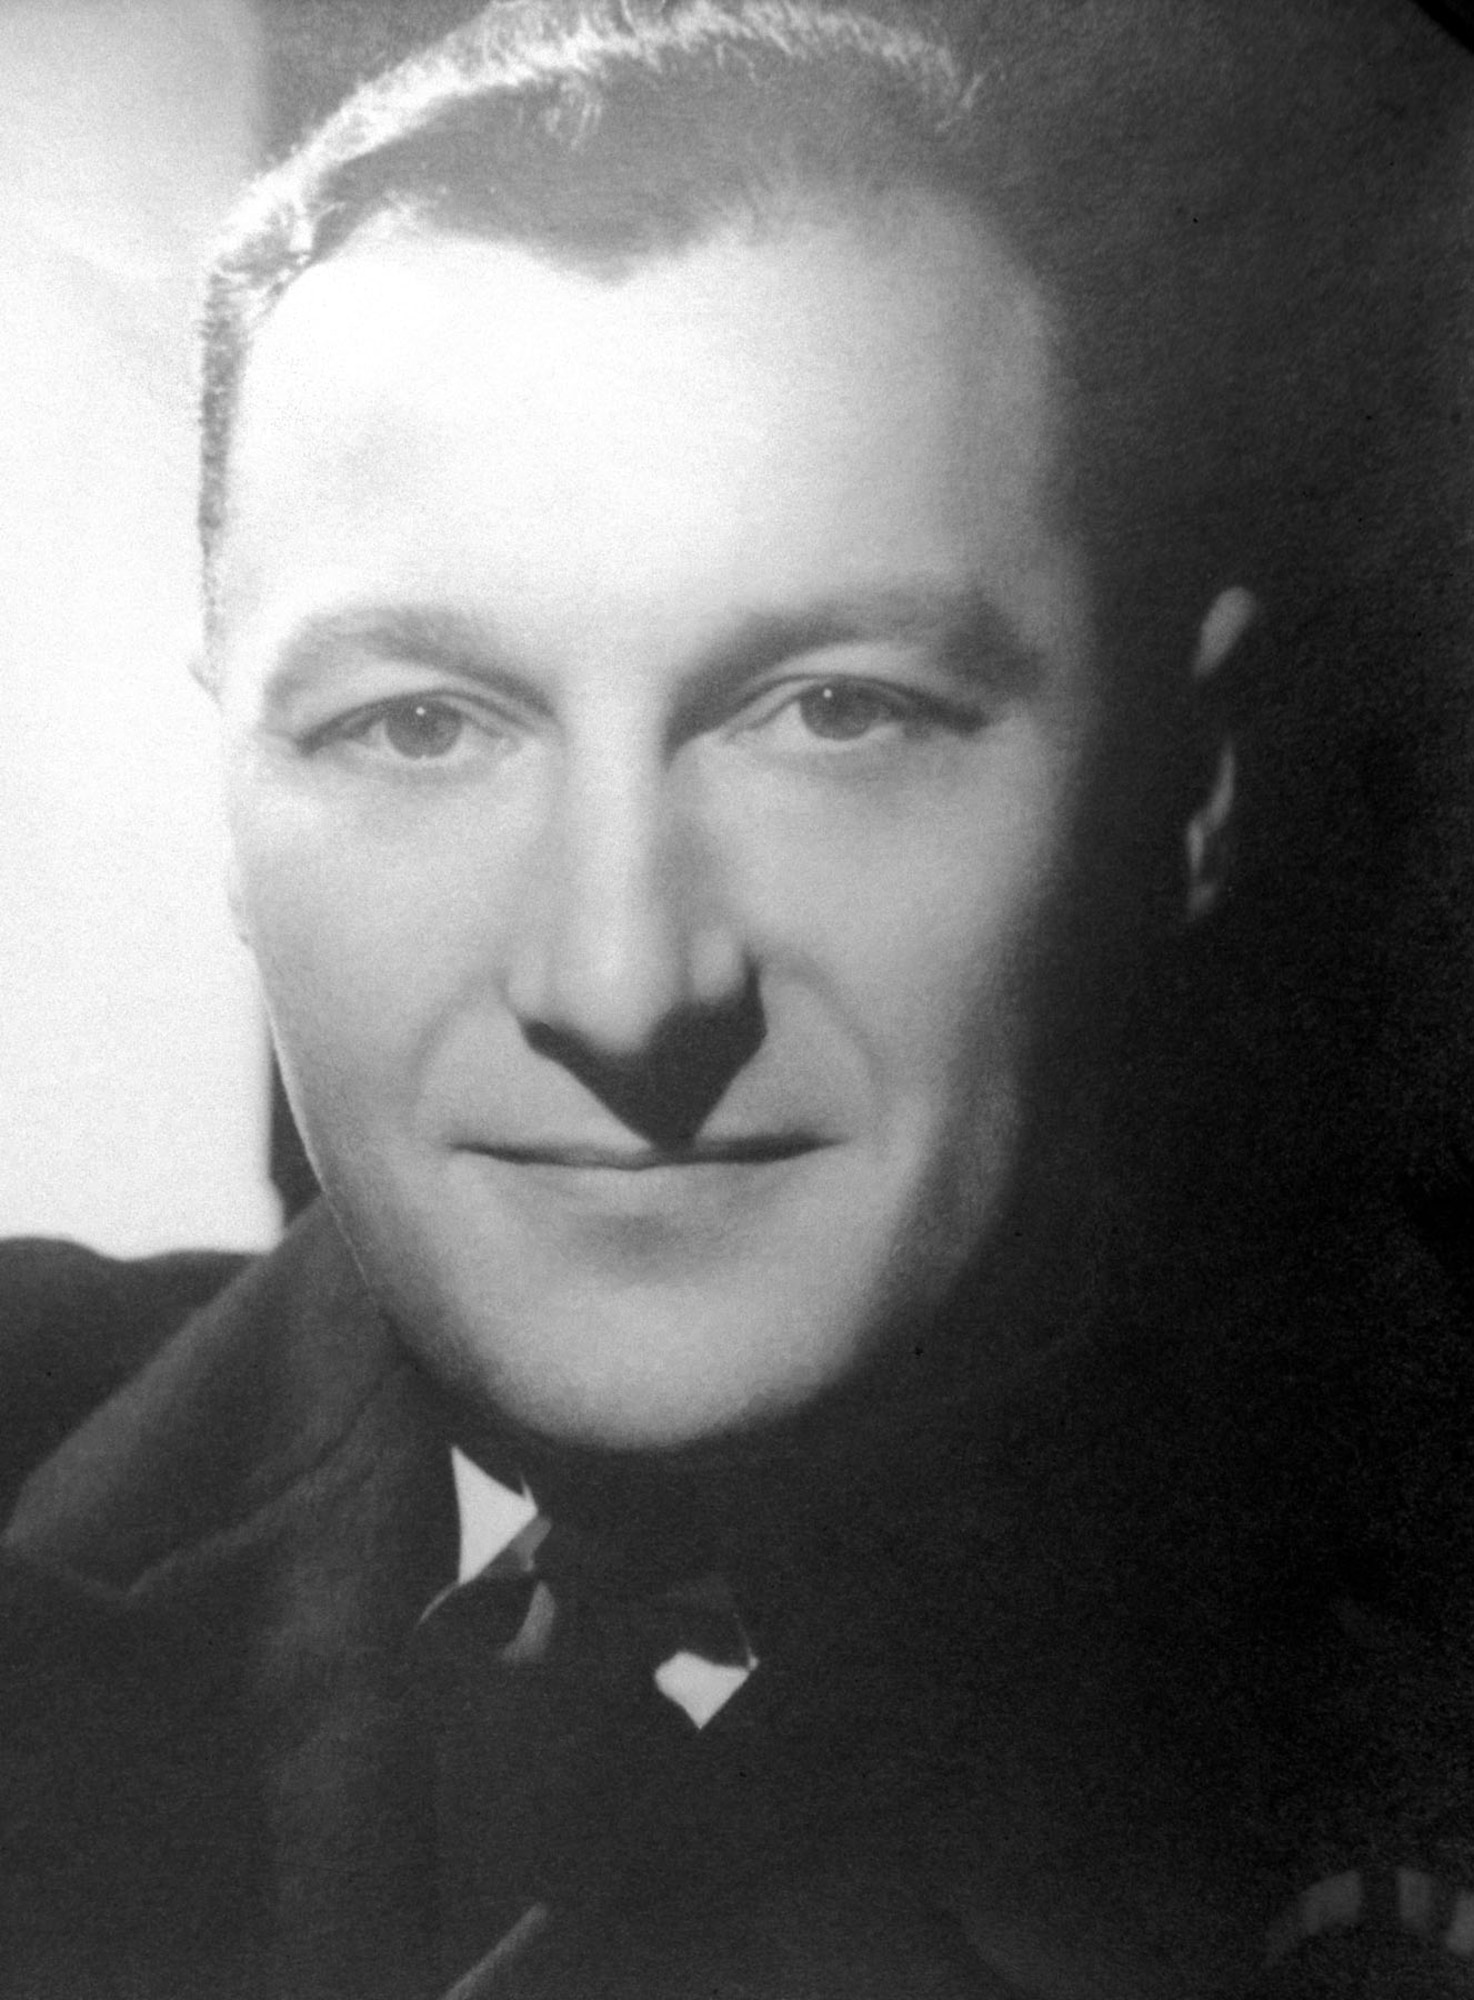 The Pat Line, headquartered in Marseilles, was named after one of its commanders, Dr. Albert-Marie Edmond Guérisse (alias Pat O'Leary). Betrayed by a traitor in March 1943, Dr. Guérisse suffered brutal Gestapo torture, but did not reveal any names.  Sent to a concentration camp and sentenced to death, he somehow survived the war. (U.S. Air Force photo)